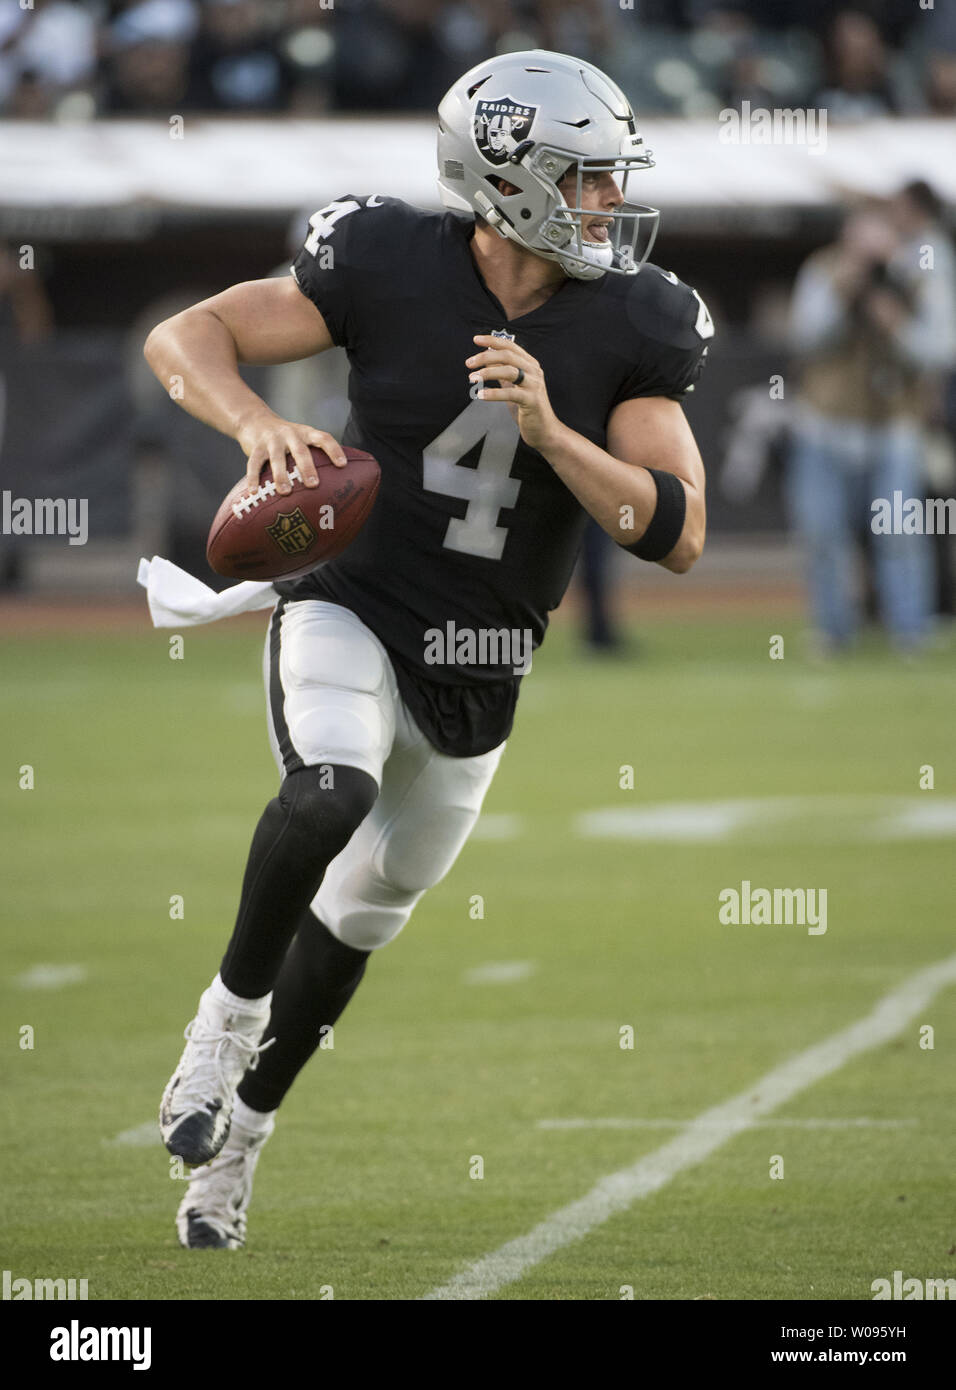 Oakland Raiders QB Derek Carr rolls out to pass in the first quarter against the Detroit Lions at the Coliseum in Oakland, California on August 10, 2018. The Raiders defeated the Lions 16-10.     Photo by Terry Schmitt/UPI Stock Photo